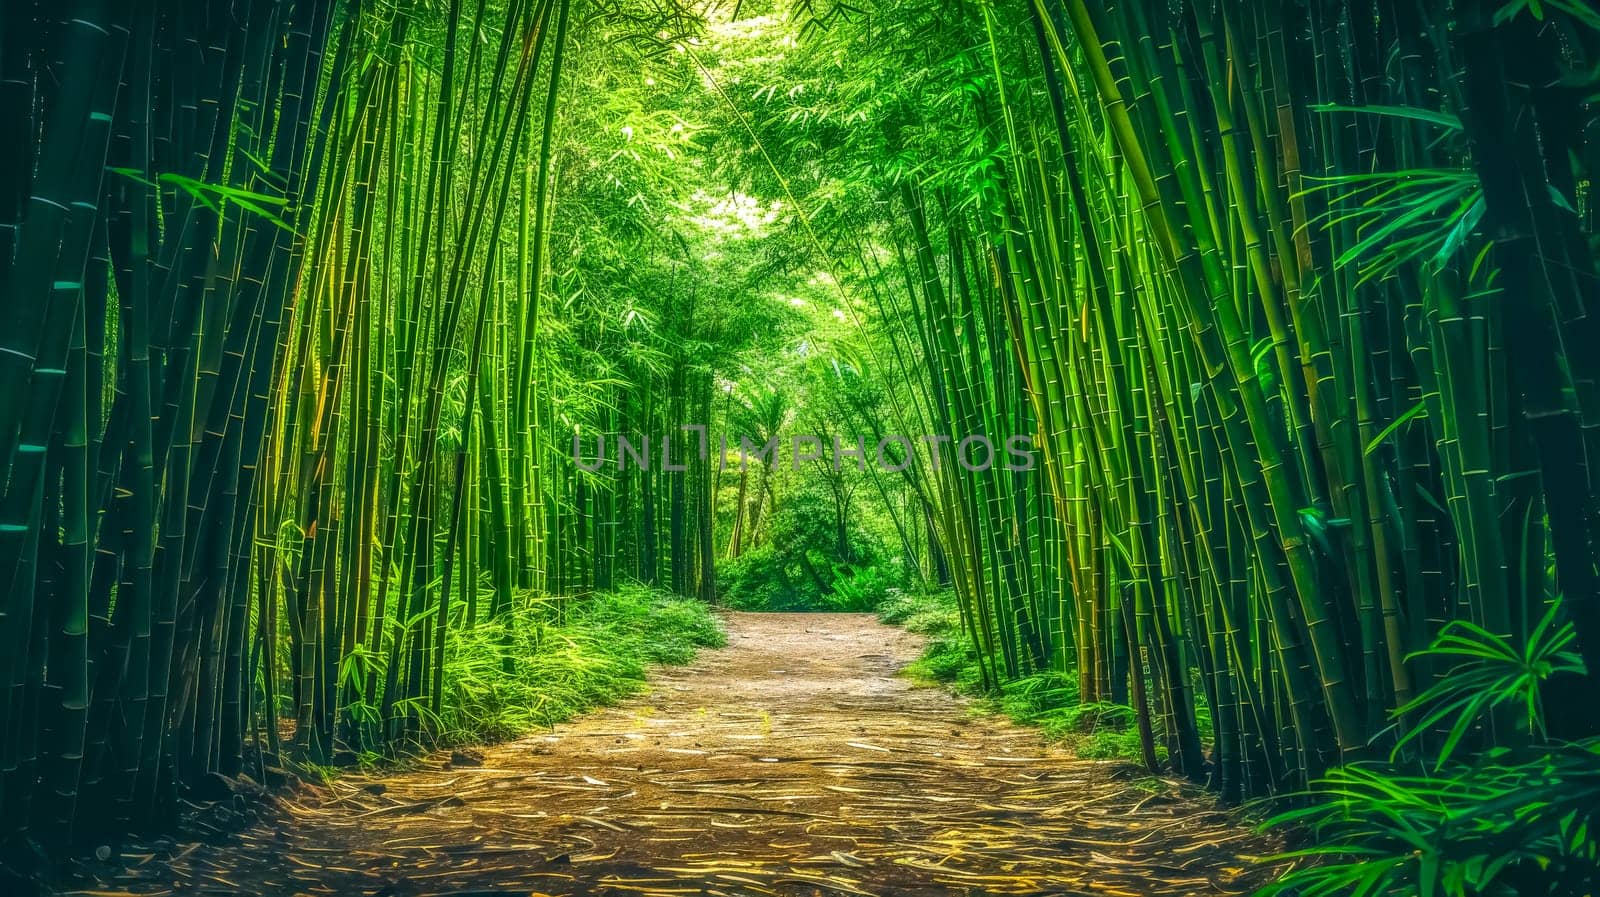 Serene pathway through a mystical bamboo forest radiating with vibrant green hues by Edophoto